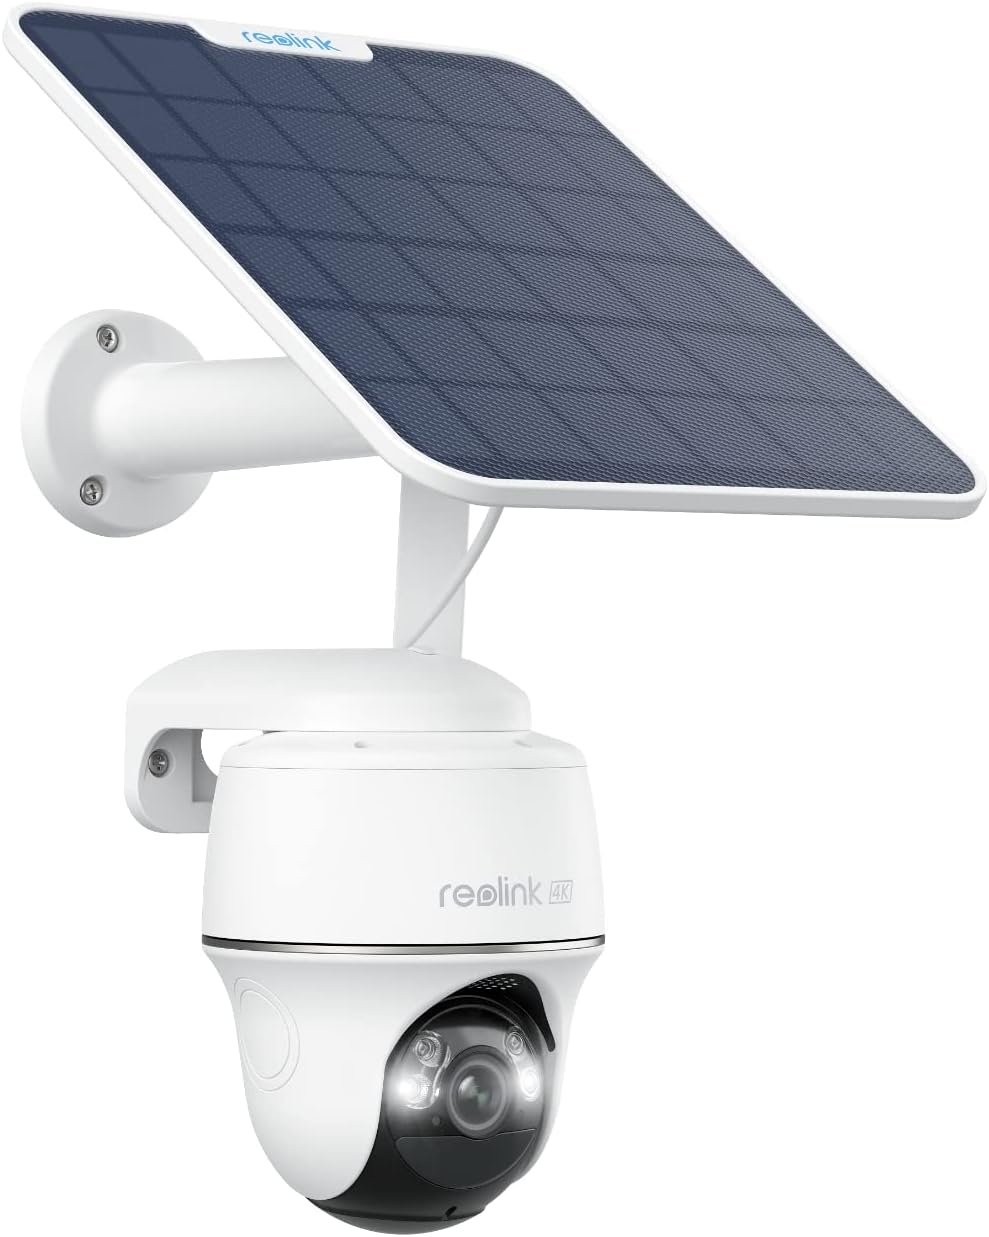 REOLINK Go PT Ultra+SP - 4K Cellular Security Camera Wireless Outdoor, No WiFi, 3G/4G LTE, Support (Verizon/AT&T/T-Mobile), Solar Powered, Color Night Vision, Local/Cloud Storage, Smart Detection